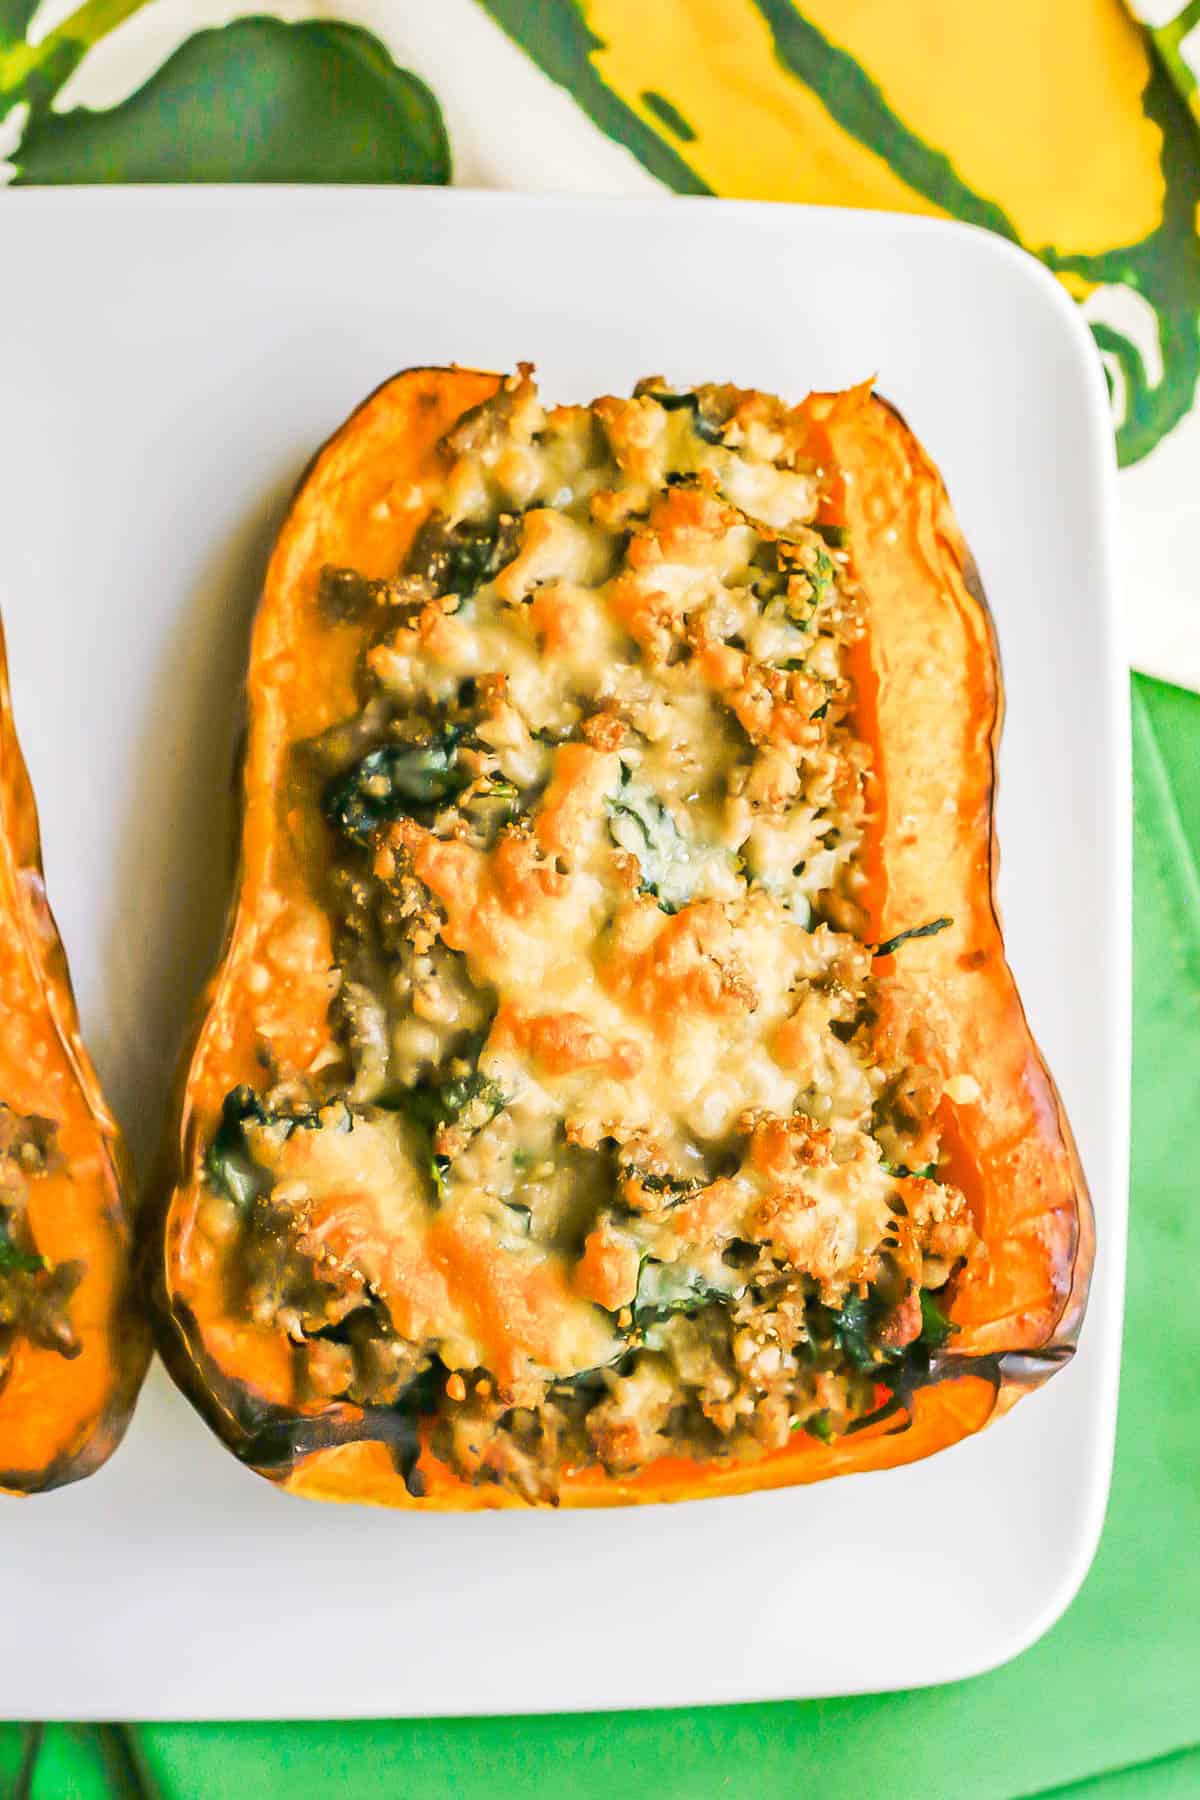 A butternut squash half with a turkey sausage and spinach mixture topped with melted, browned Parmesan cheese served on a white plate.